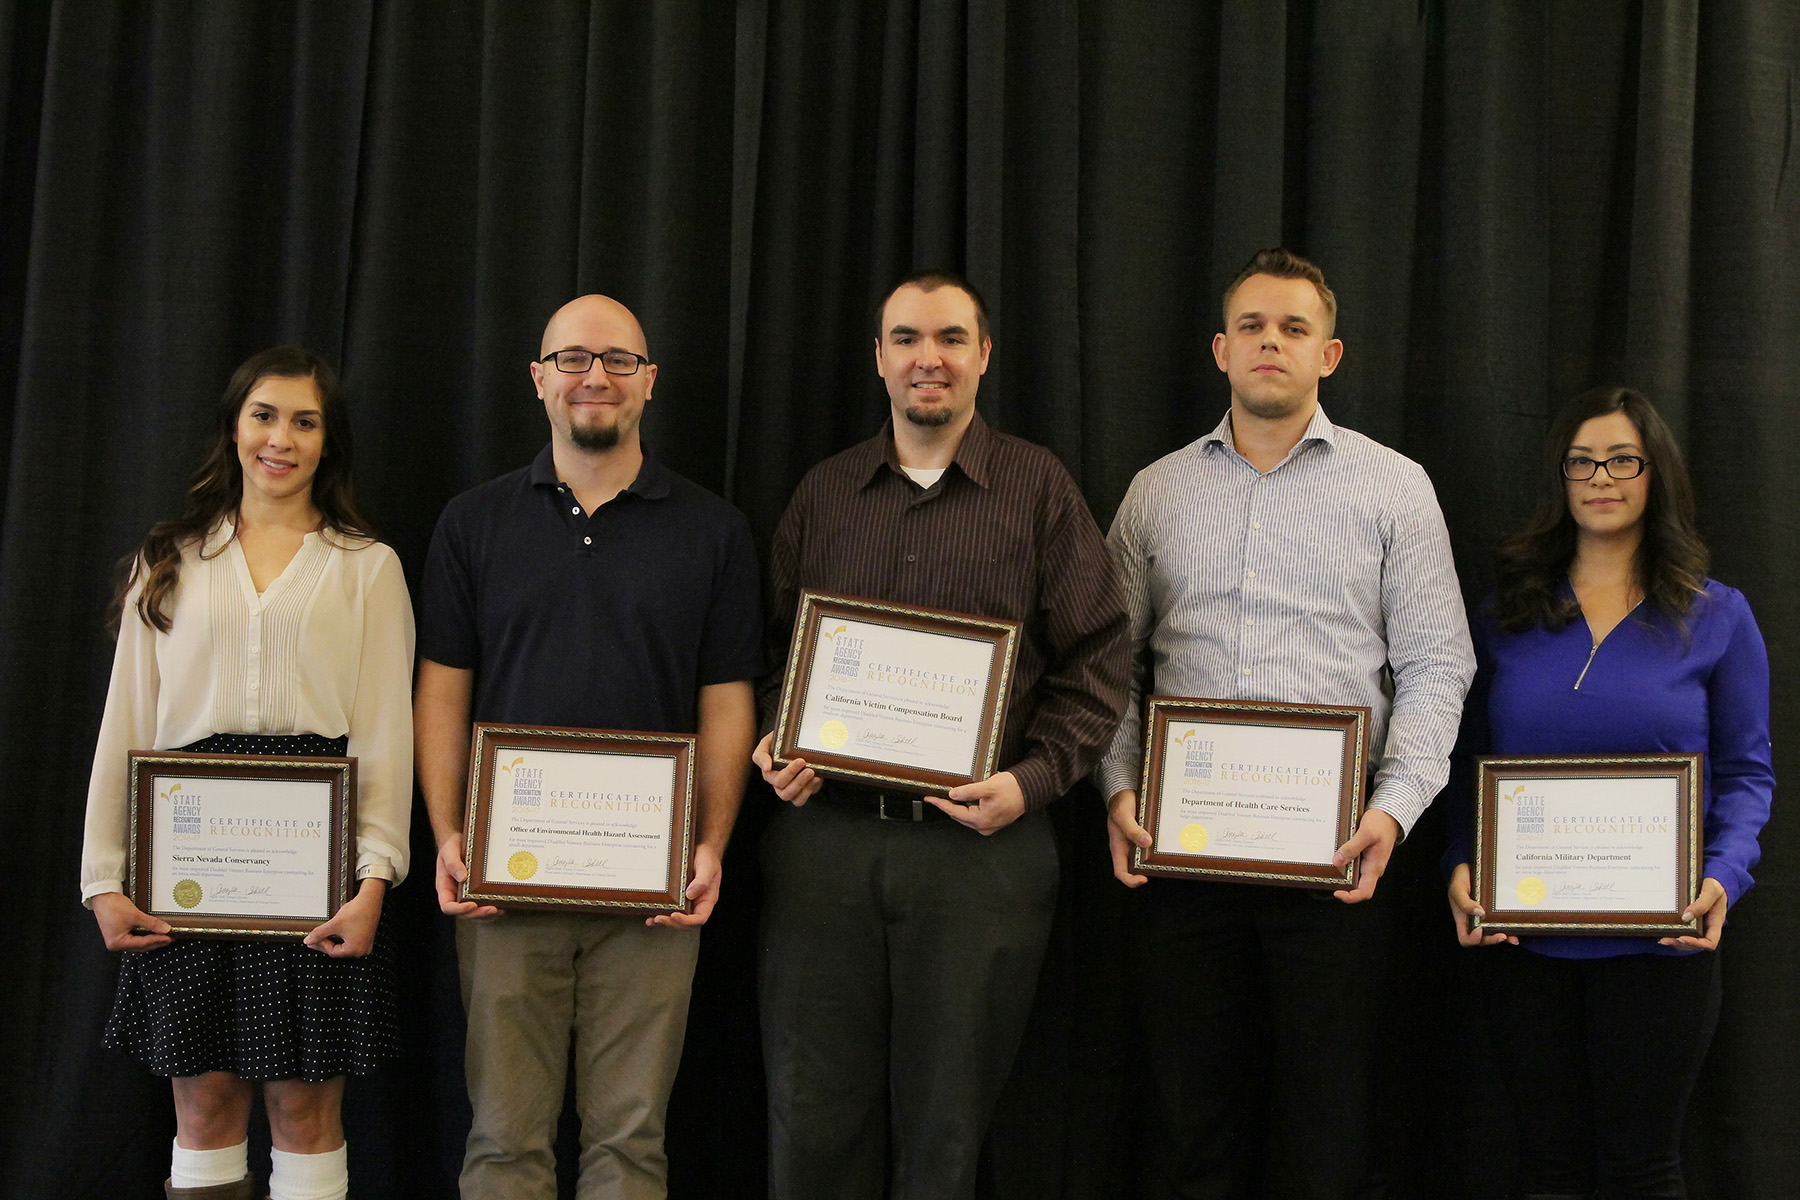 A photo of all the most improved disabled veteran business enterprise participation awardees. Pictured from left to right: Amanda Grant, Anthony Picciano, Ryan Metzer, Max Lyulkin, and Sandy Villalobos.